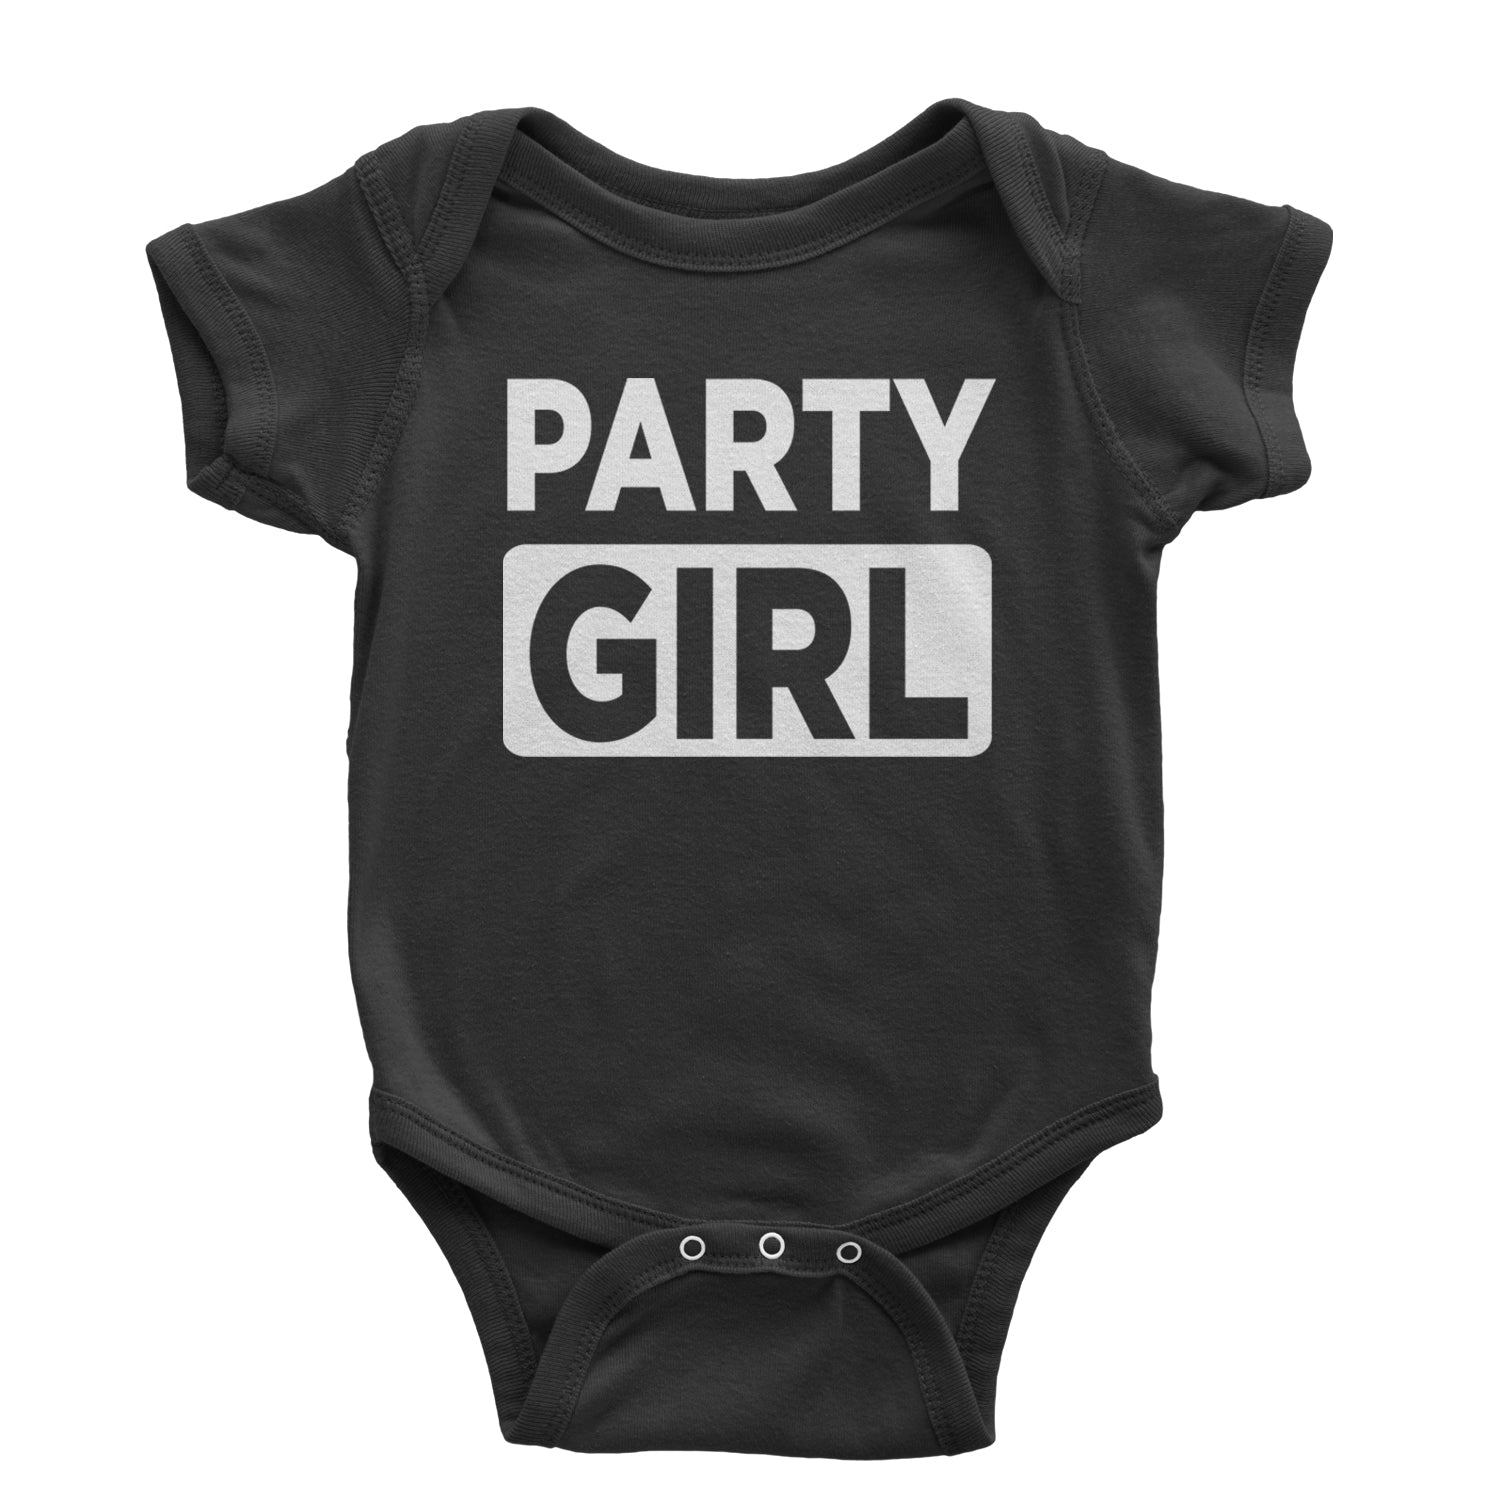 Party Girl Club Brat Infant One-Piece Romper Bodysuit and Toddler T-shirt